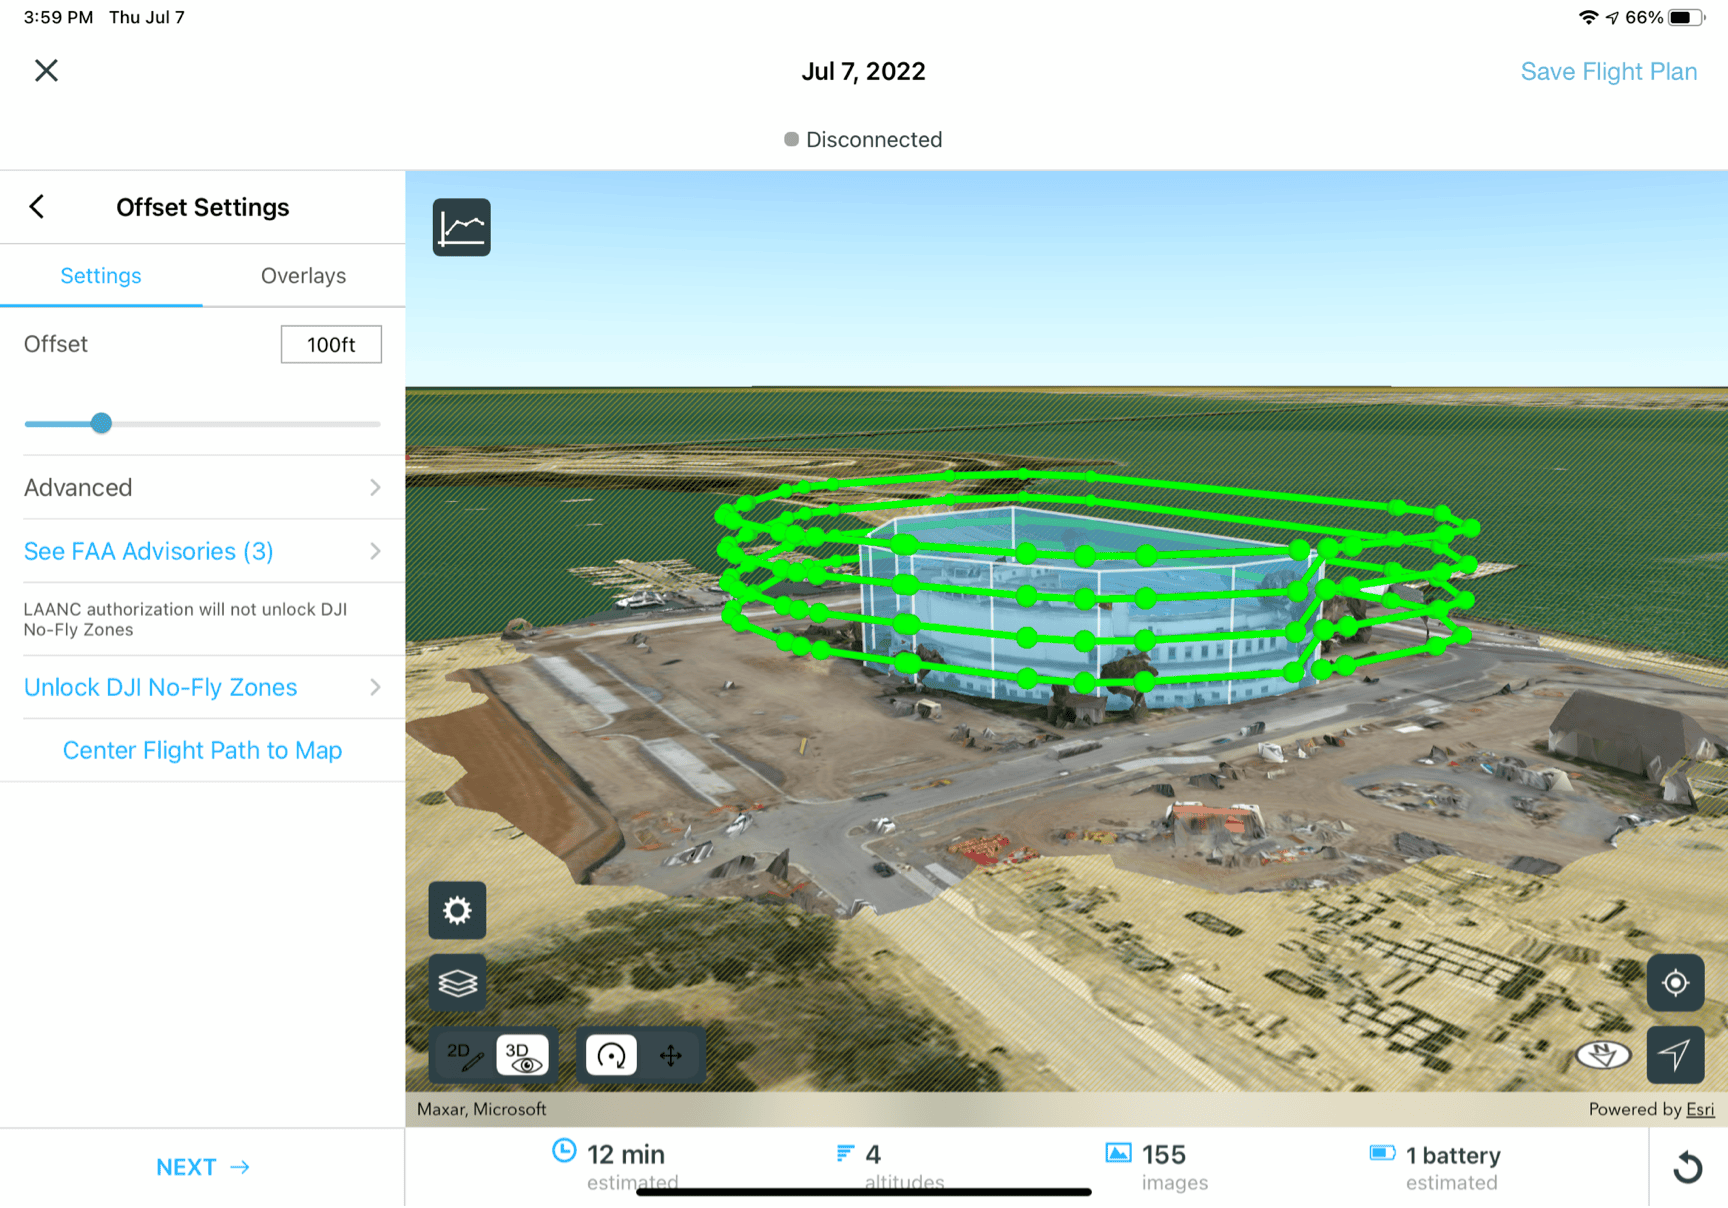 Drone-Derived 3D Mesh on the ground with surrounding flight